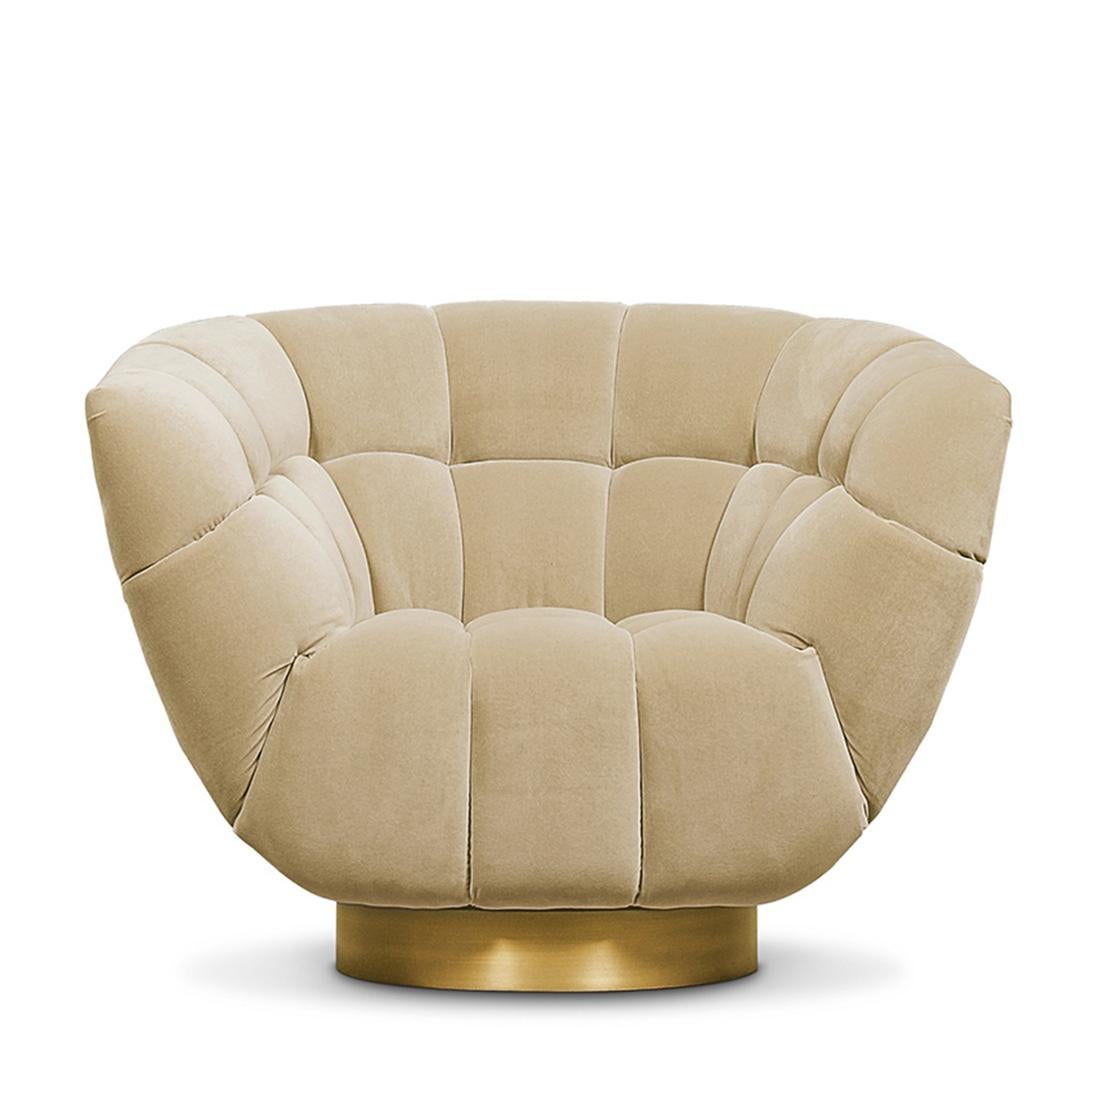 Armchair Snug with solid wood structure
upholstered and covered with beige cotton
velvet fabric. On swivel base in antique matte
brass finish.
Also available with other fabrics, on request.